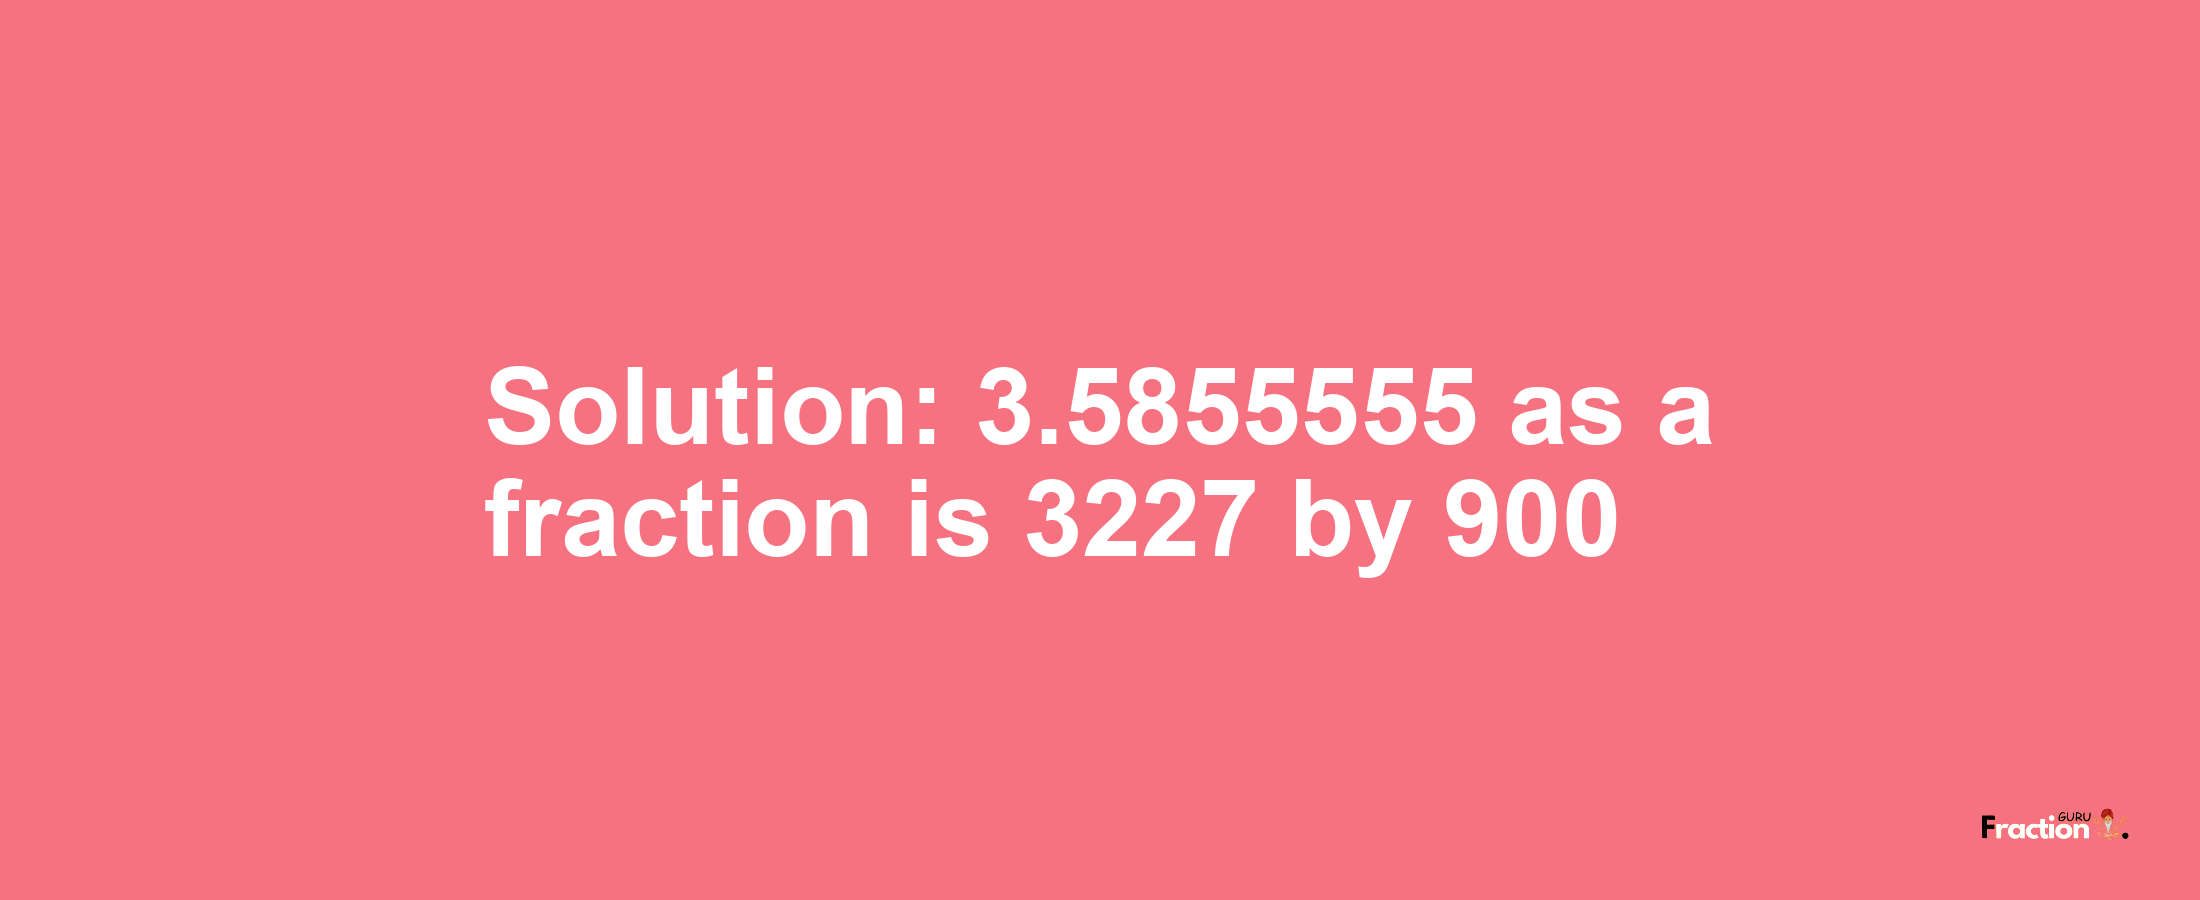 Solution:3.5855555 as a fraction is 3227/900